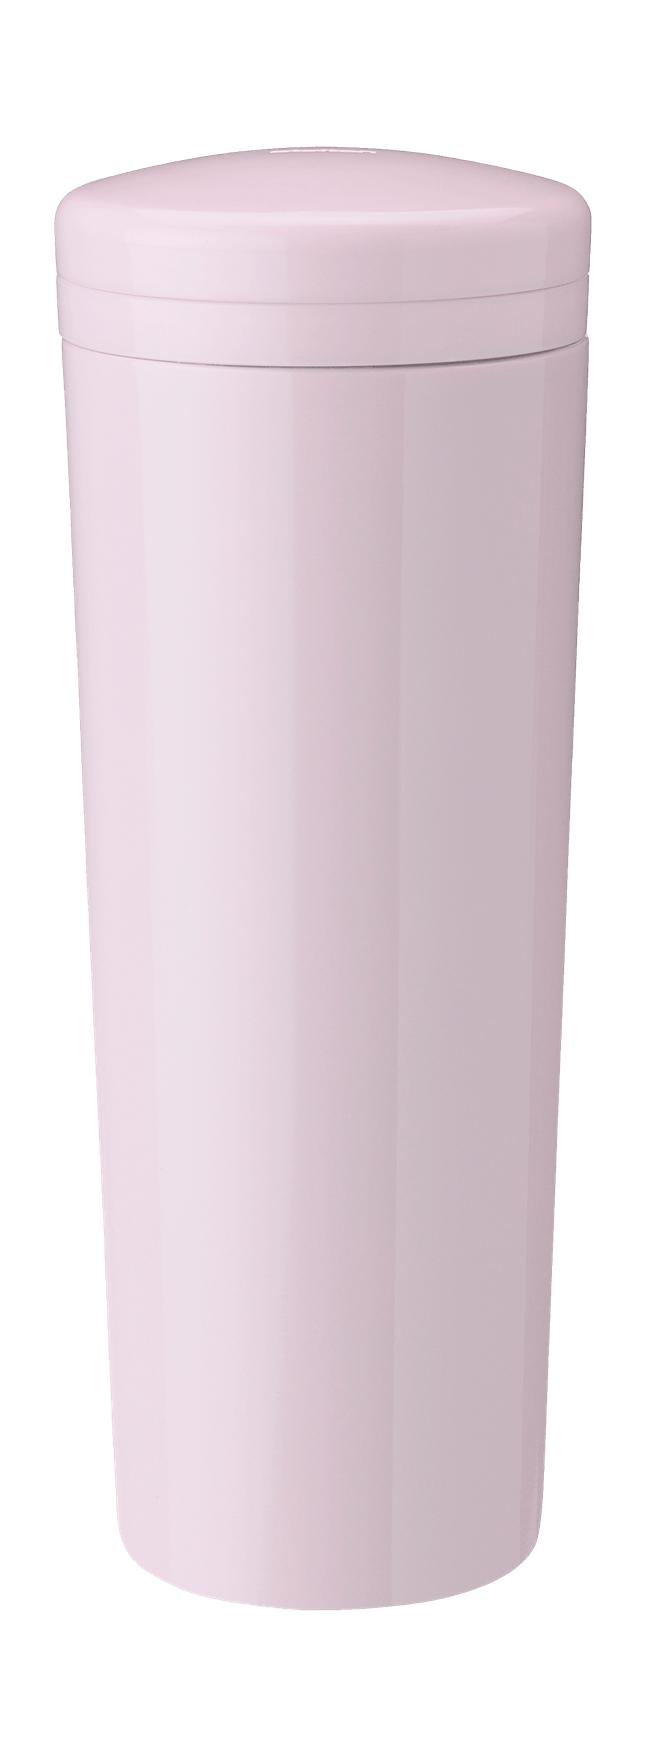 Stelton Carrie Thermosflasche 0,5 L, Rose